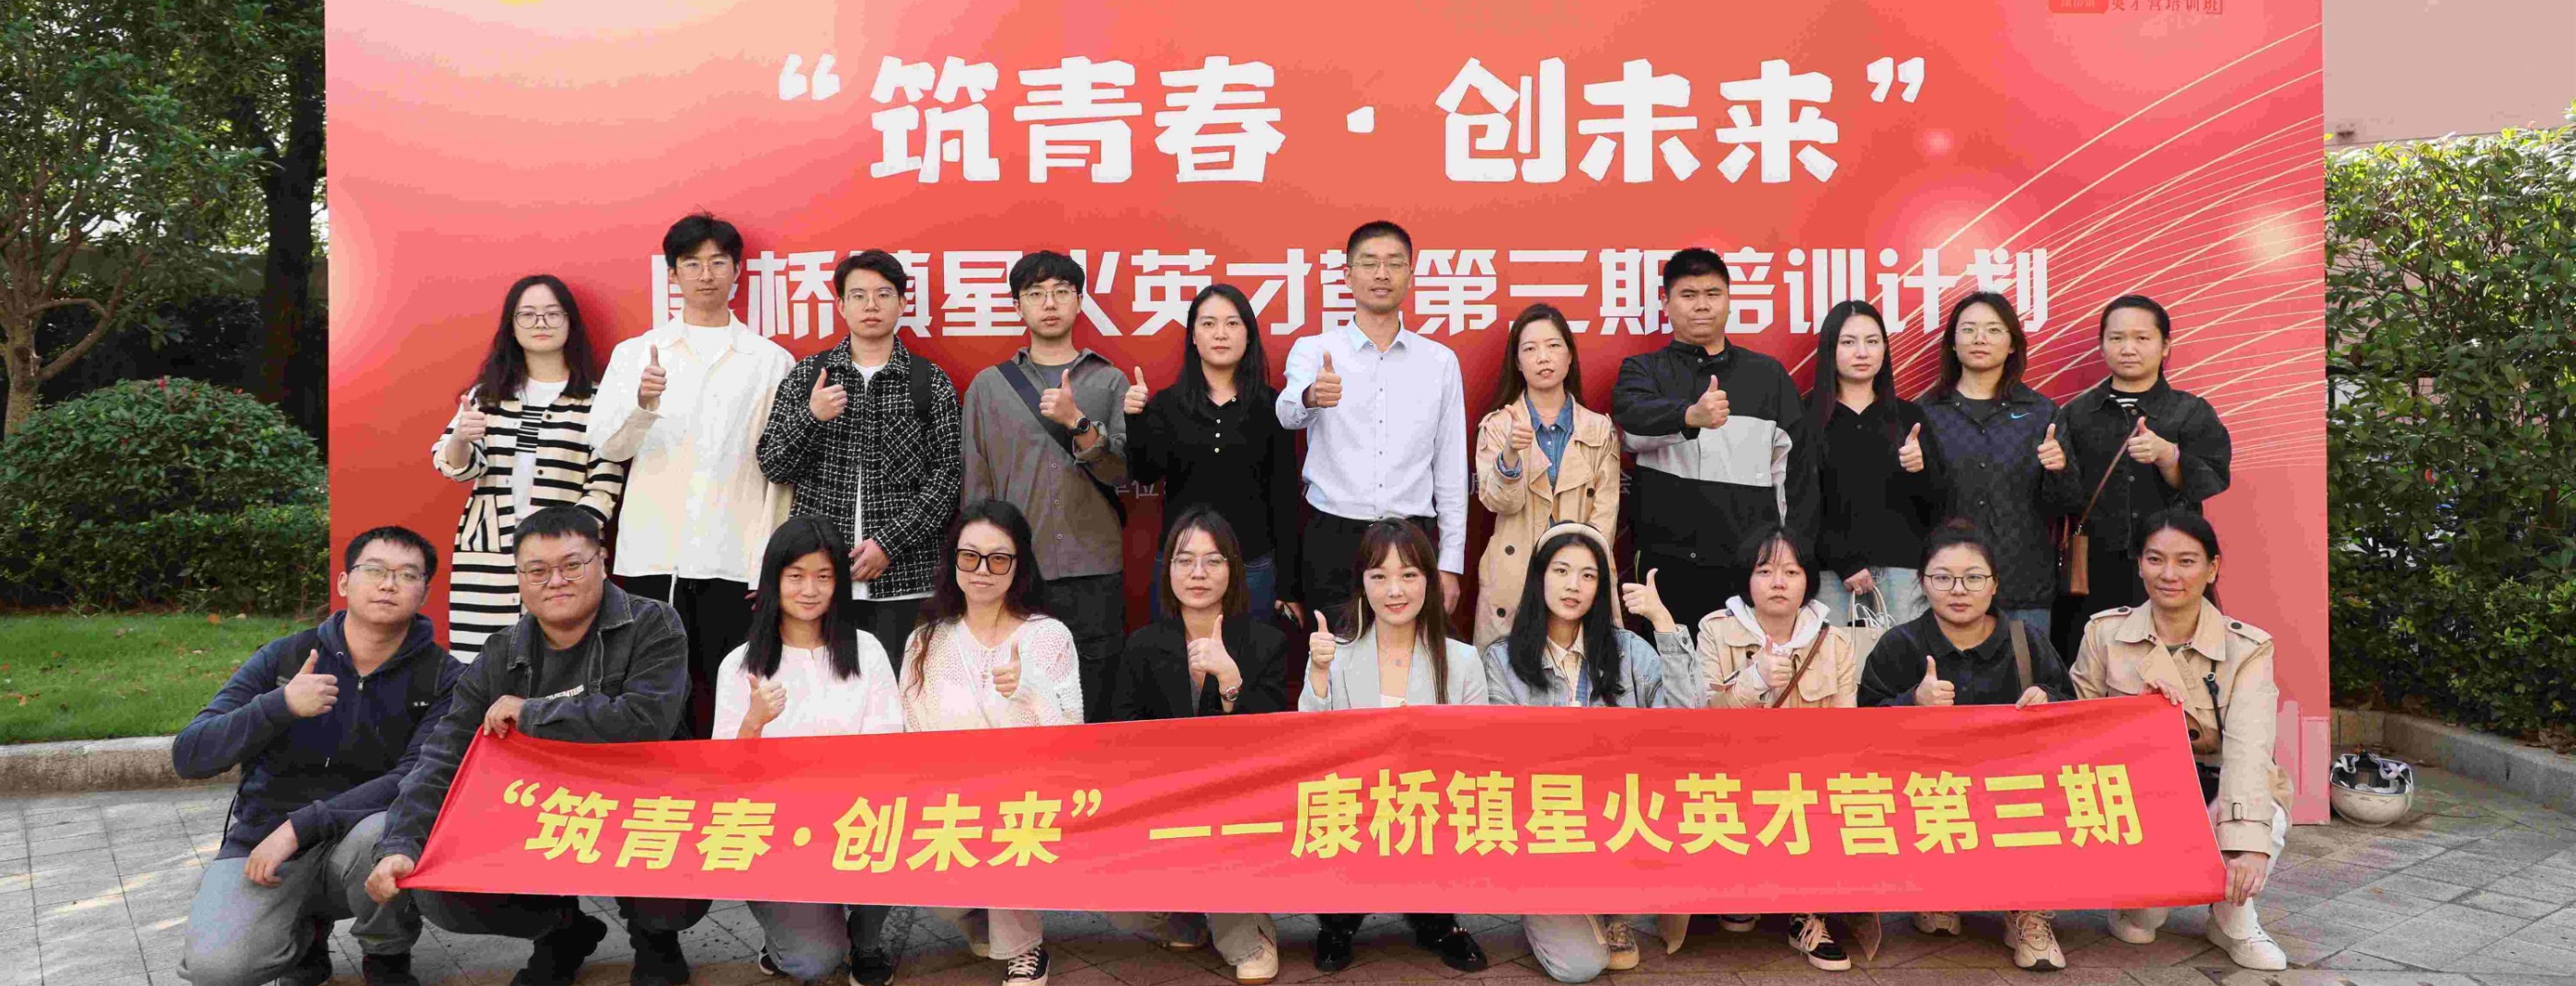 The third training course of Kangqiao Town Spark Talent Camp has successfully concluded